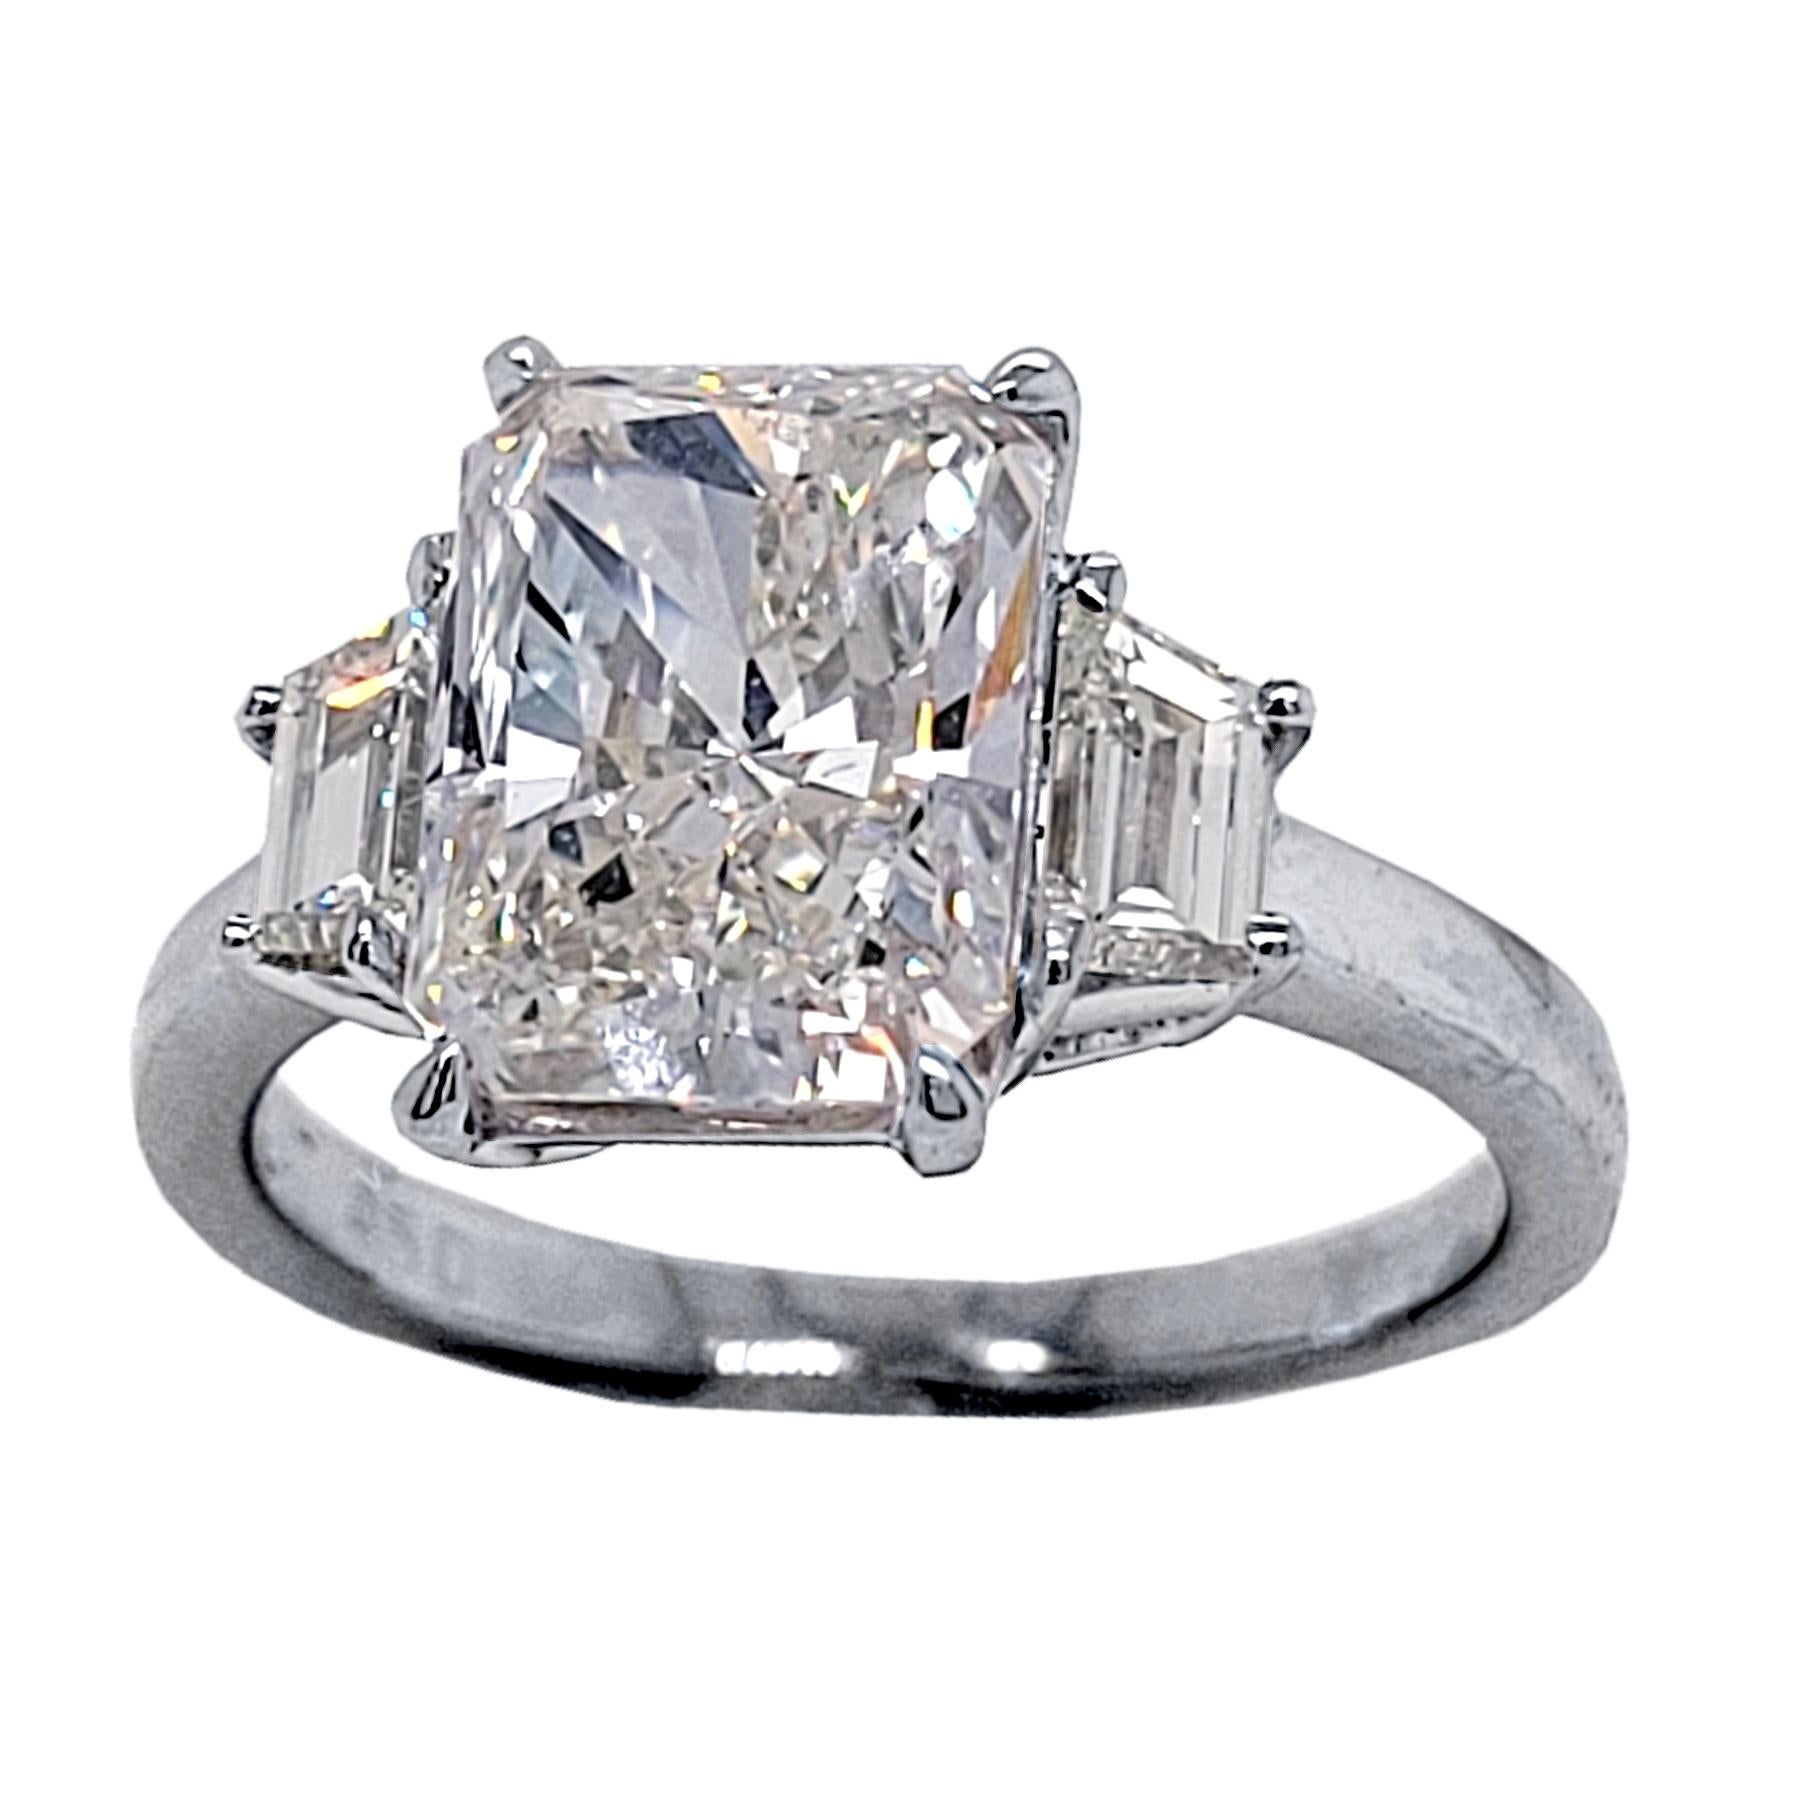 A beautiful EGL US Certified Radiant Cut H/VS2 center Diamond set in a fine Platinum 3 stone Engagement Ring with 2 Trapezoid diamonds the side. Total diamond weight of 0.58 Ct. diamonds on the side. 

Diamond specs:
Center stone: 3.02 Ct EGL US